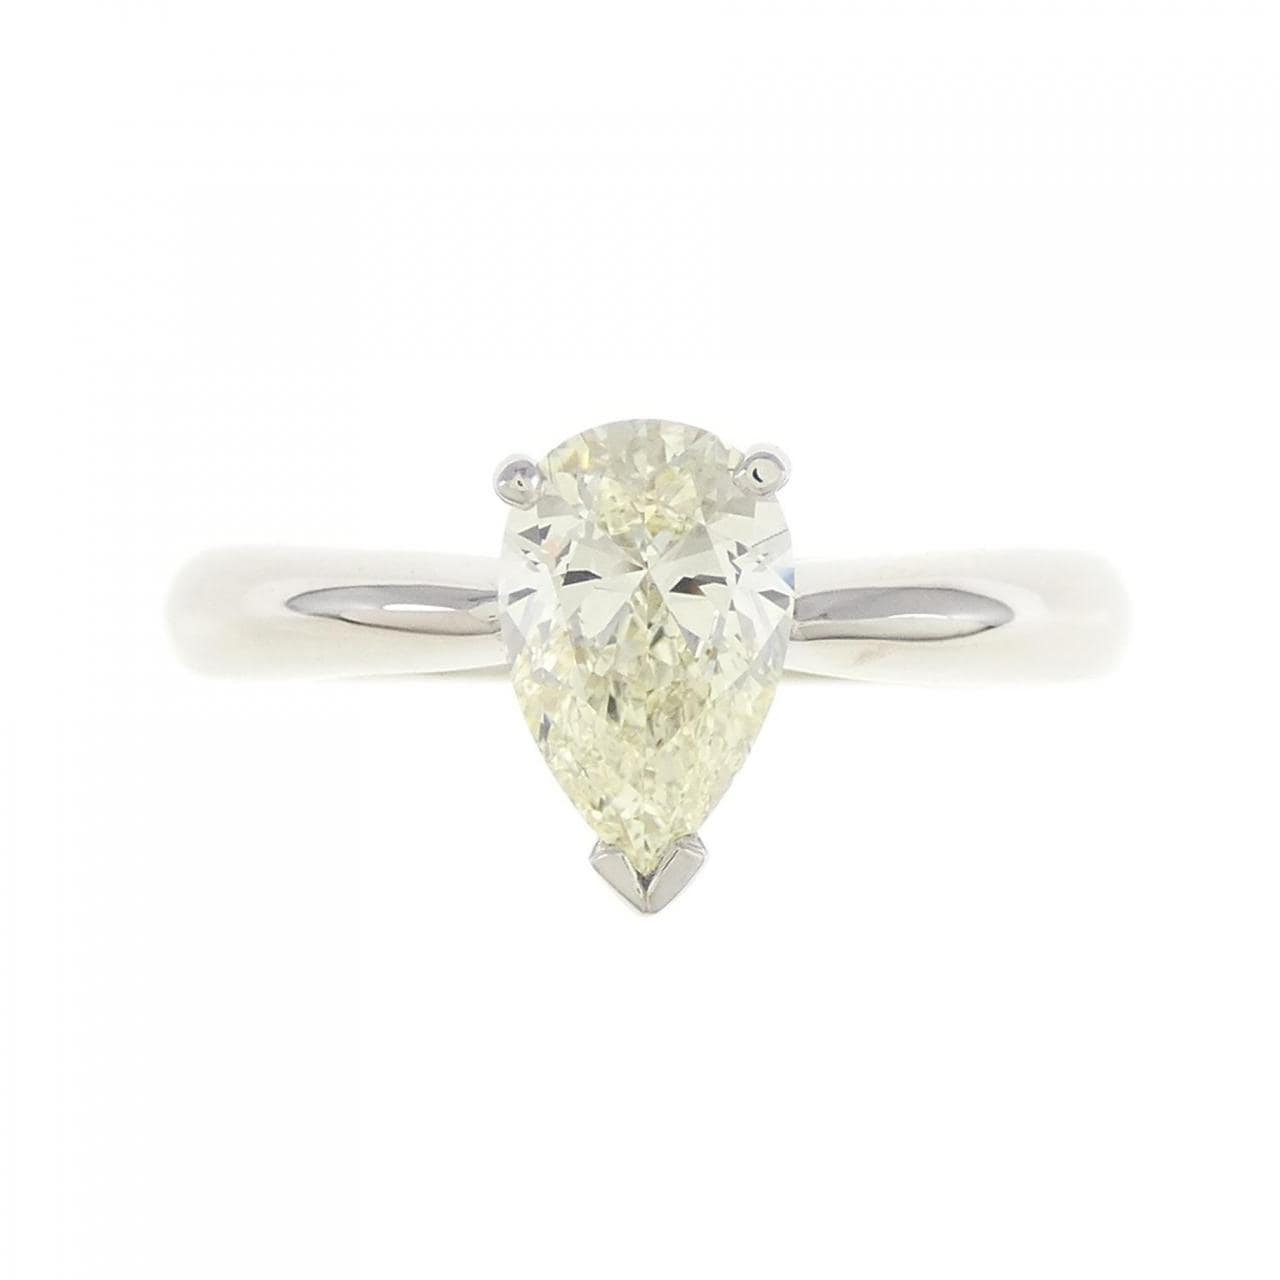 PT Diamond Ring 1.003CT VLY IF Pear Shape